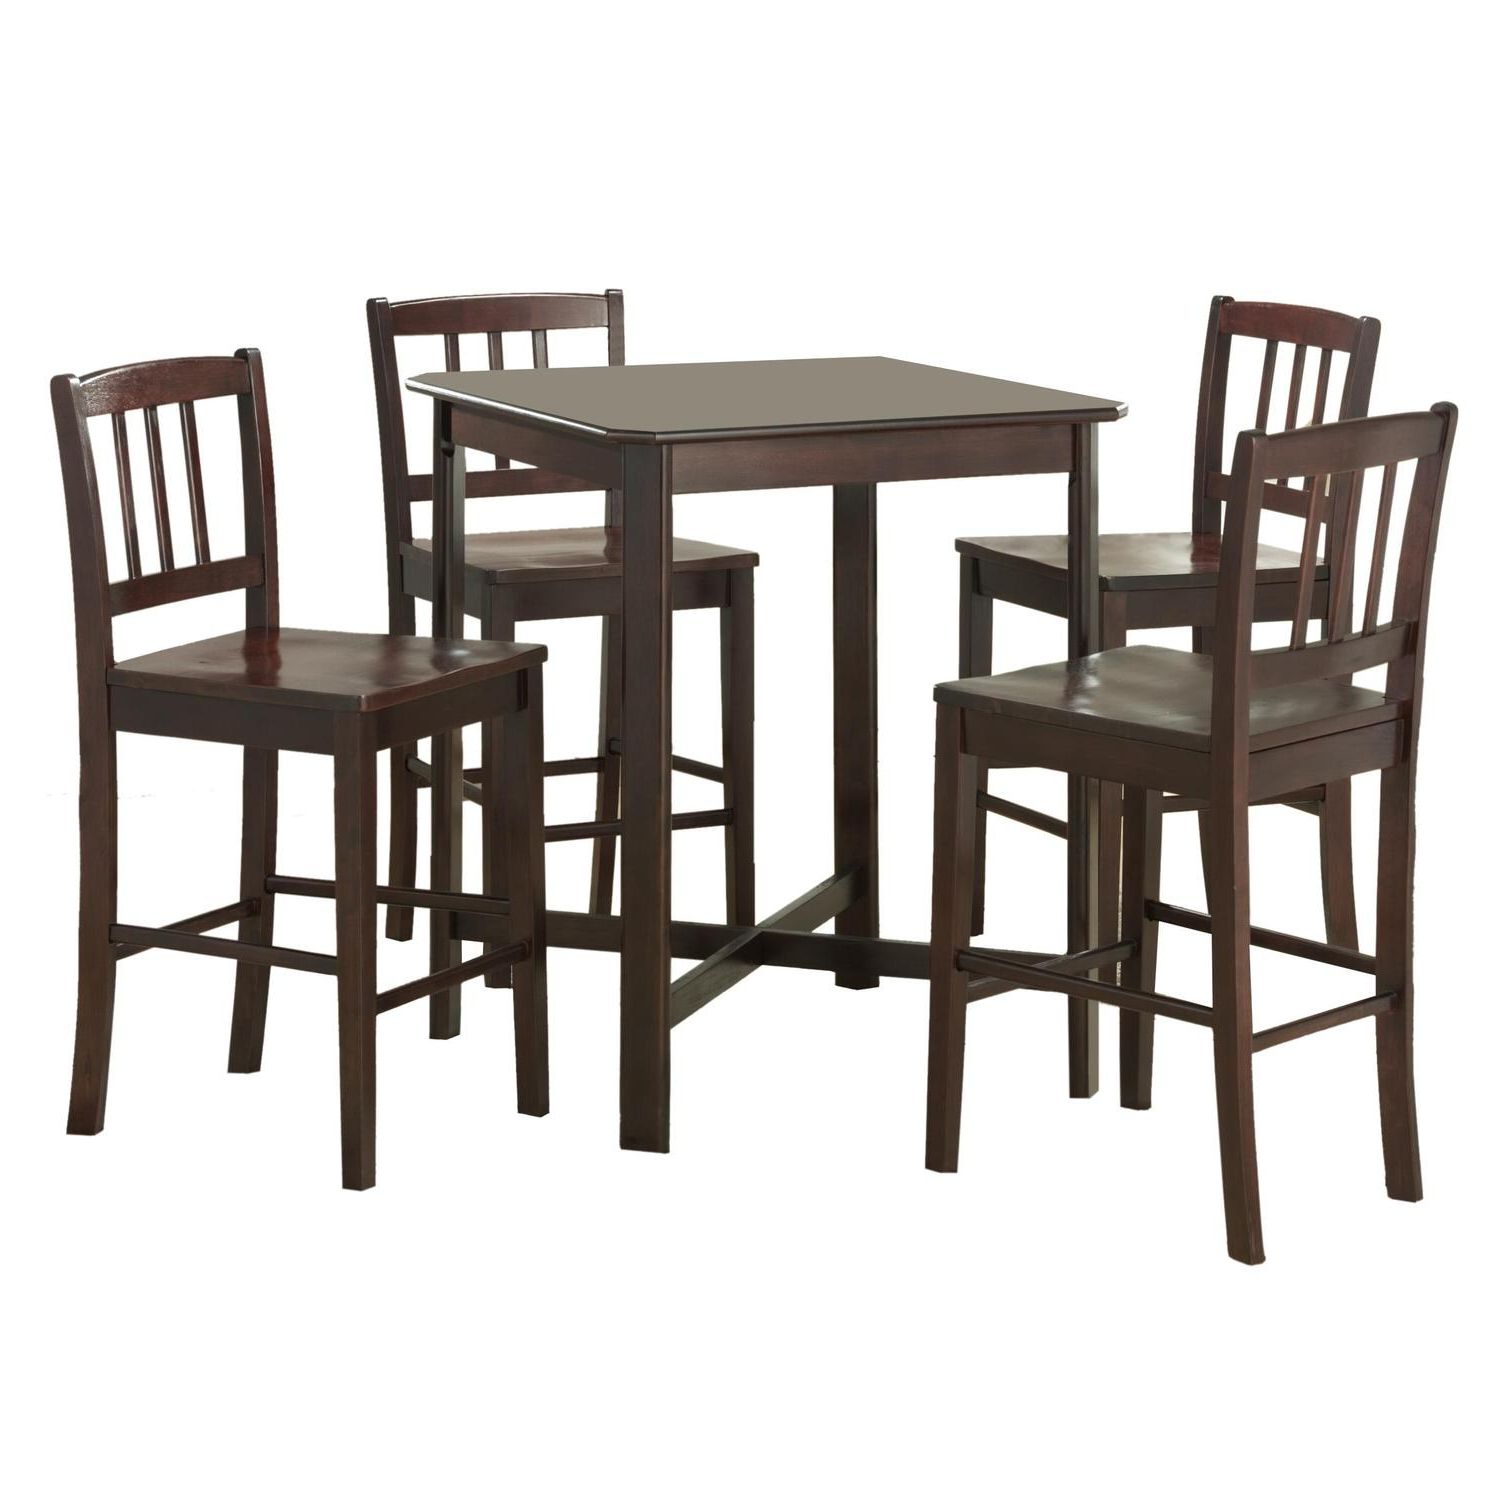 Walker Edison 5 Piece Solid Wood Pub Table Set – Dark Woodoj Pertaining To Current Wood Bistro Table And Chairs Sets (View 11 of 15)